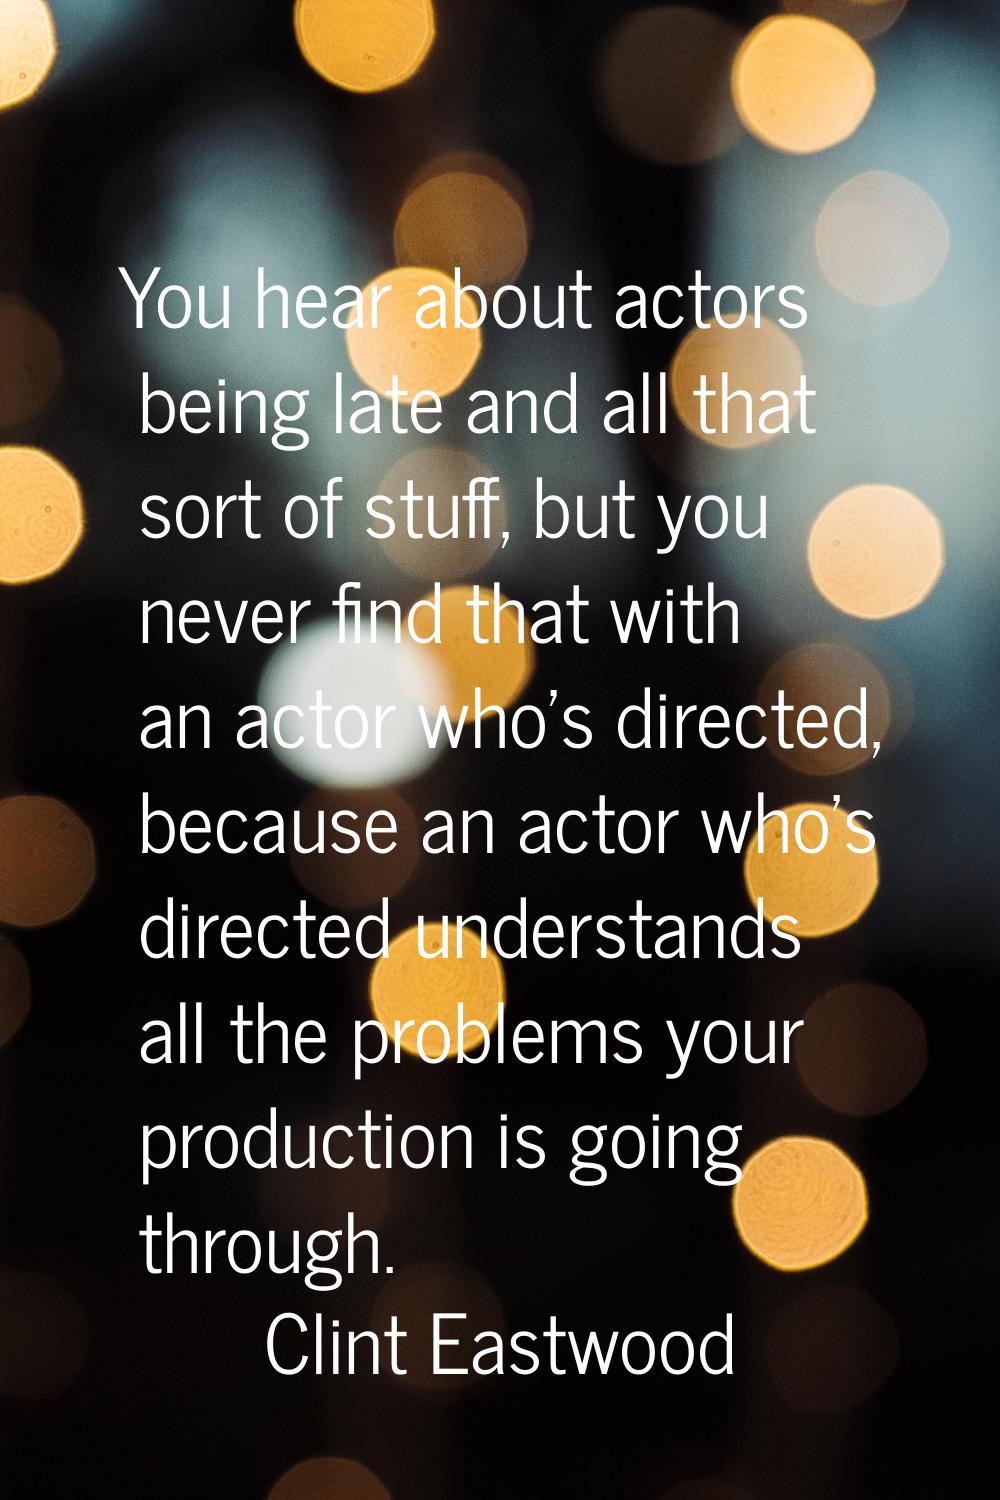 You hear about actors being late and all that sort of stuff, but you never find that with an actor 